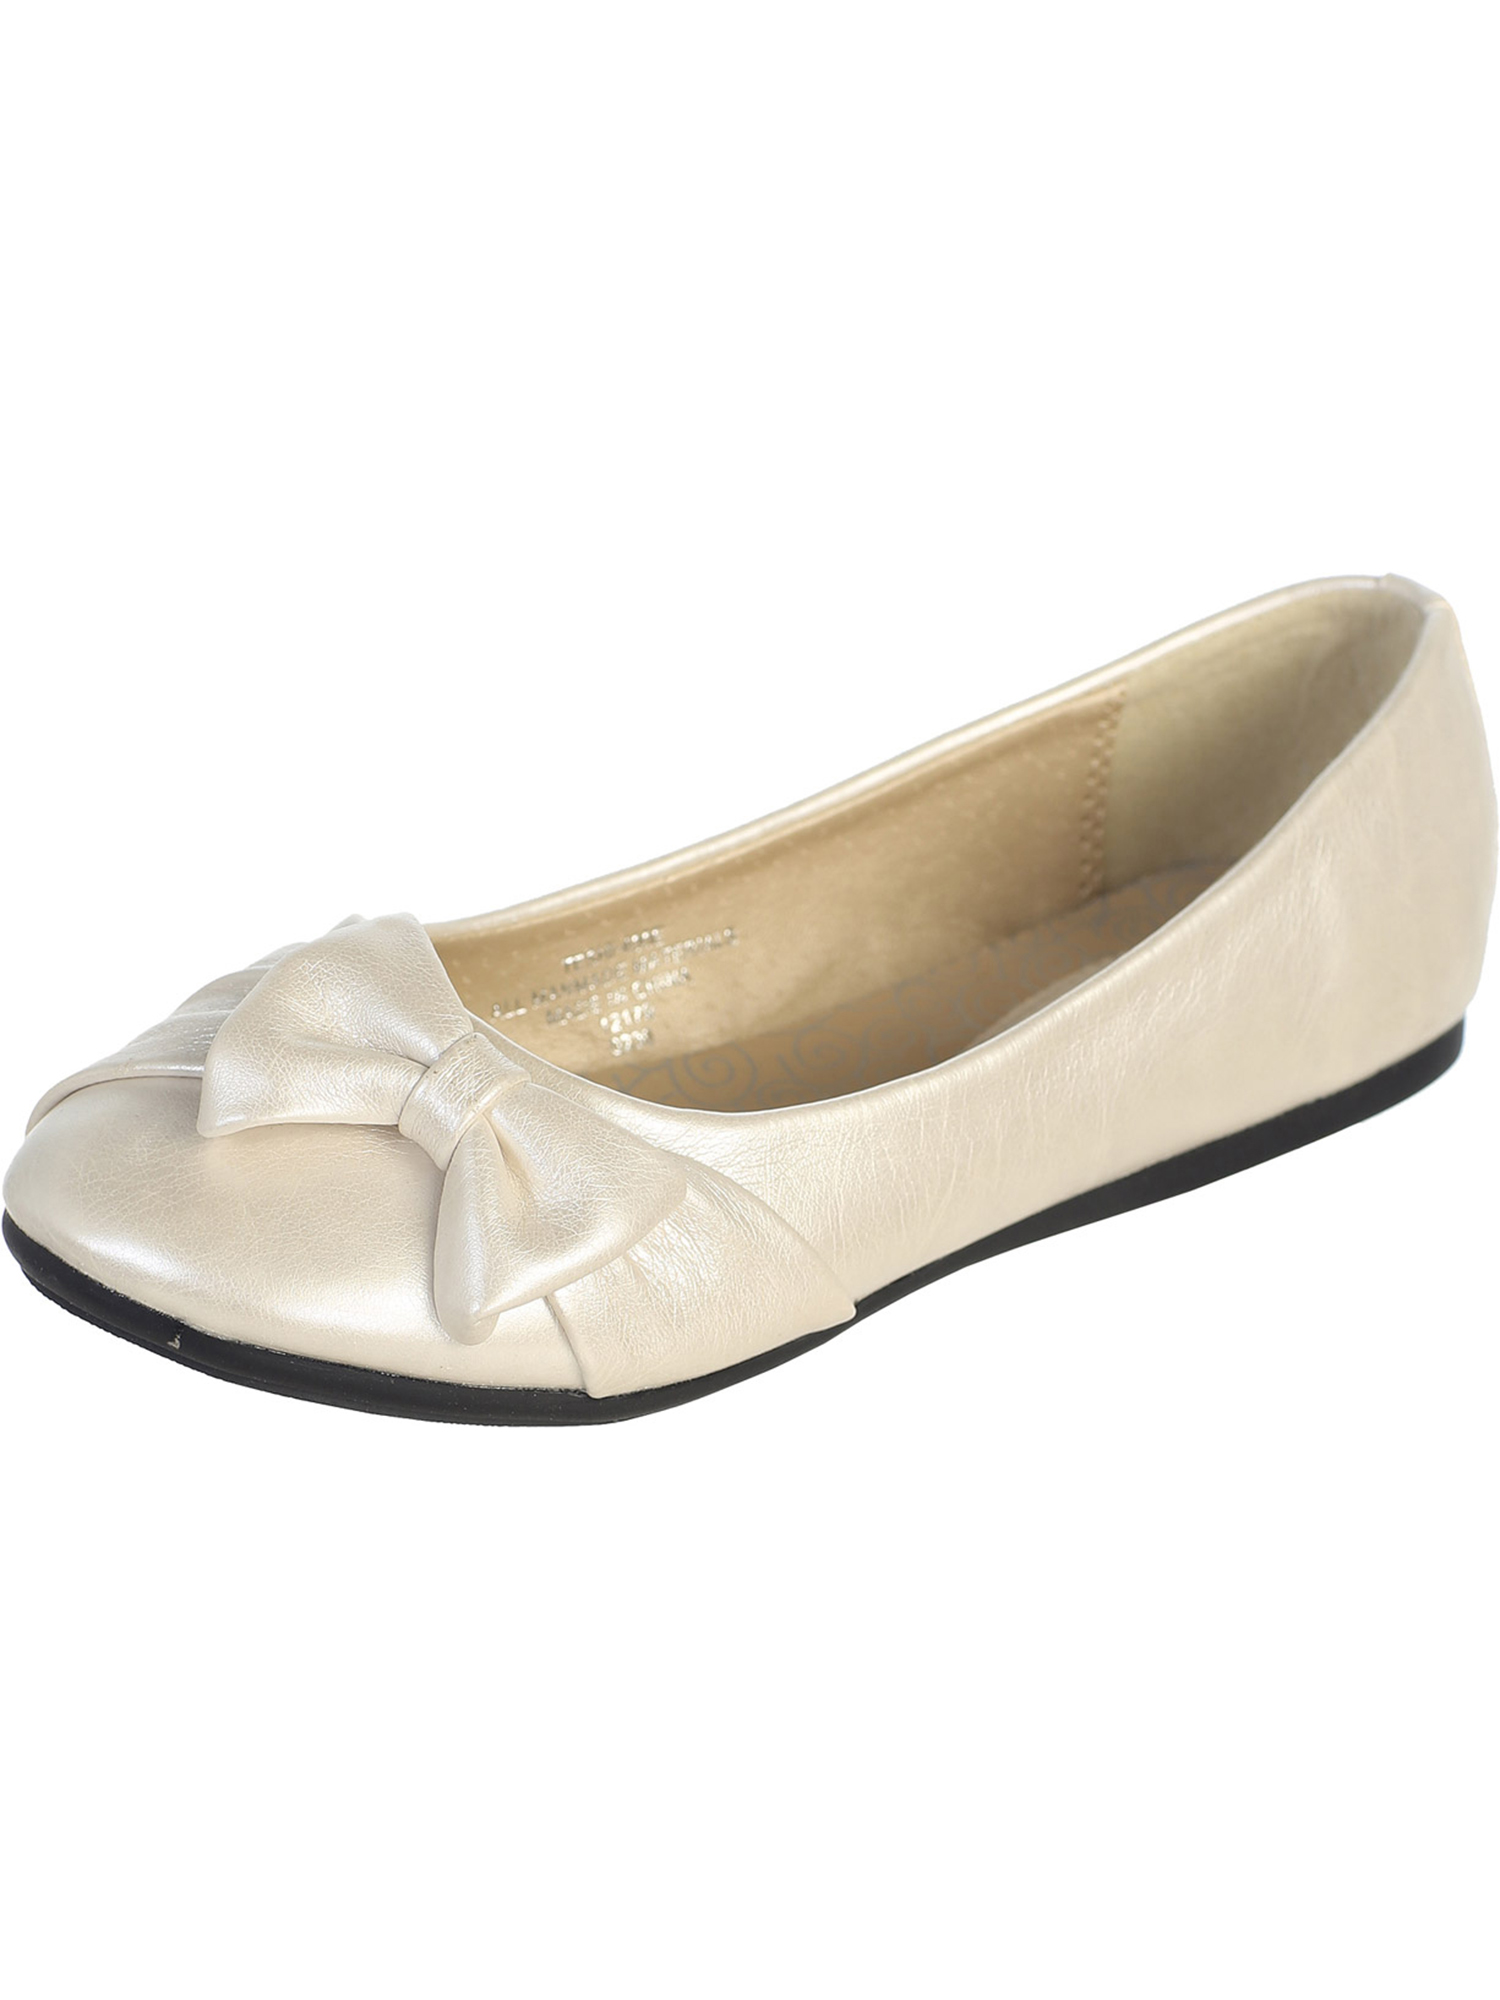 Ivory Pearl Girl's Flat Shoes with Side Bow Girl 2